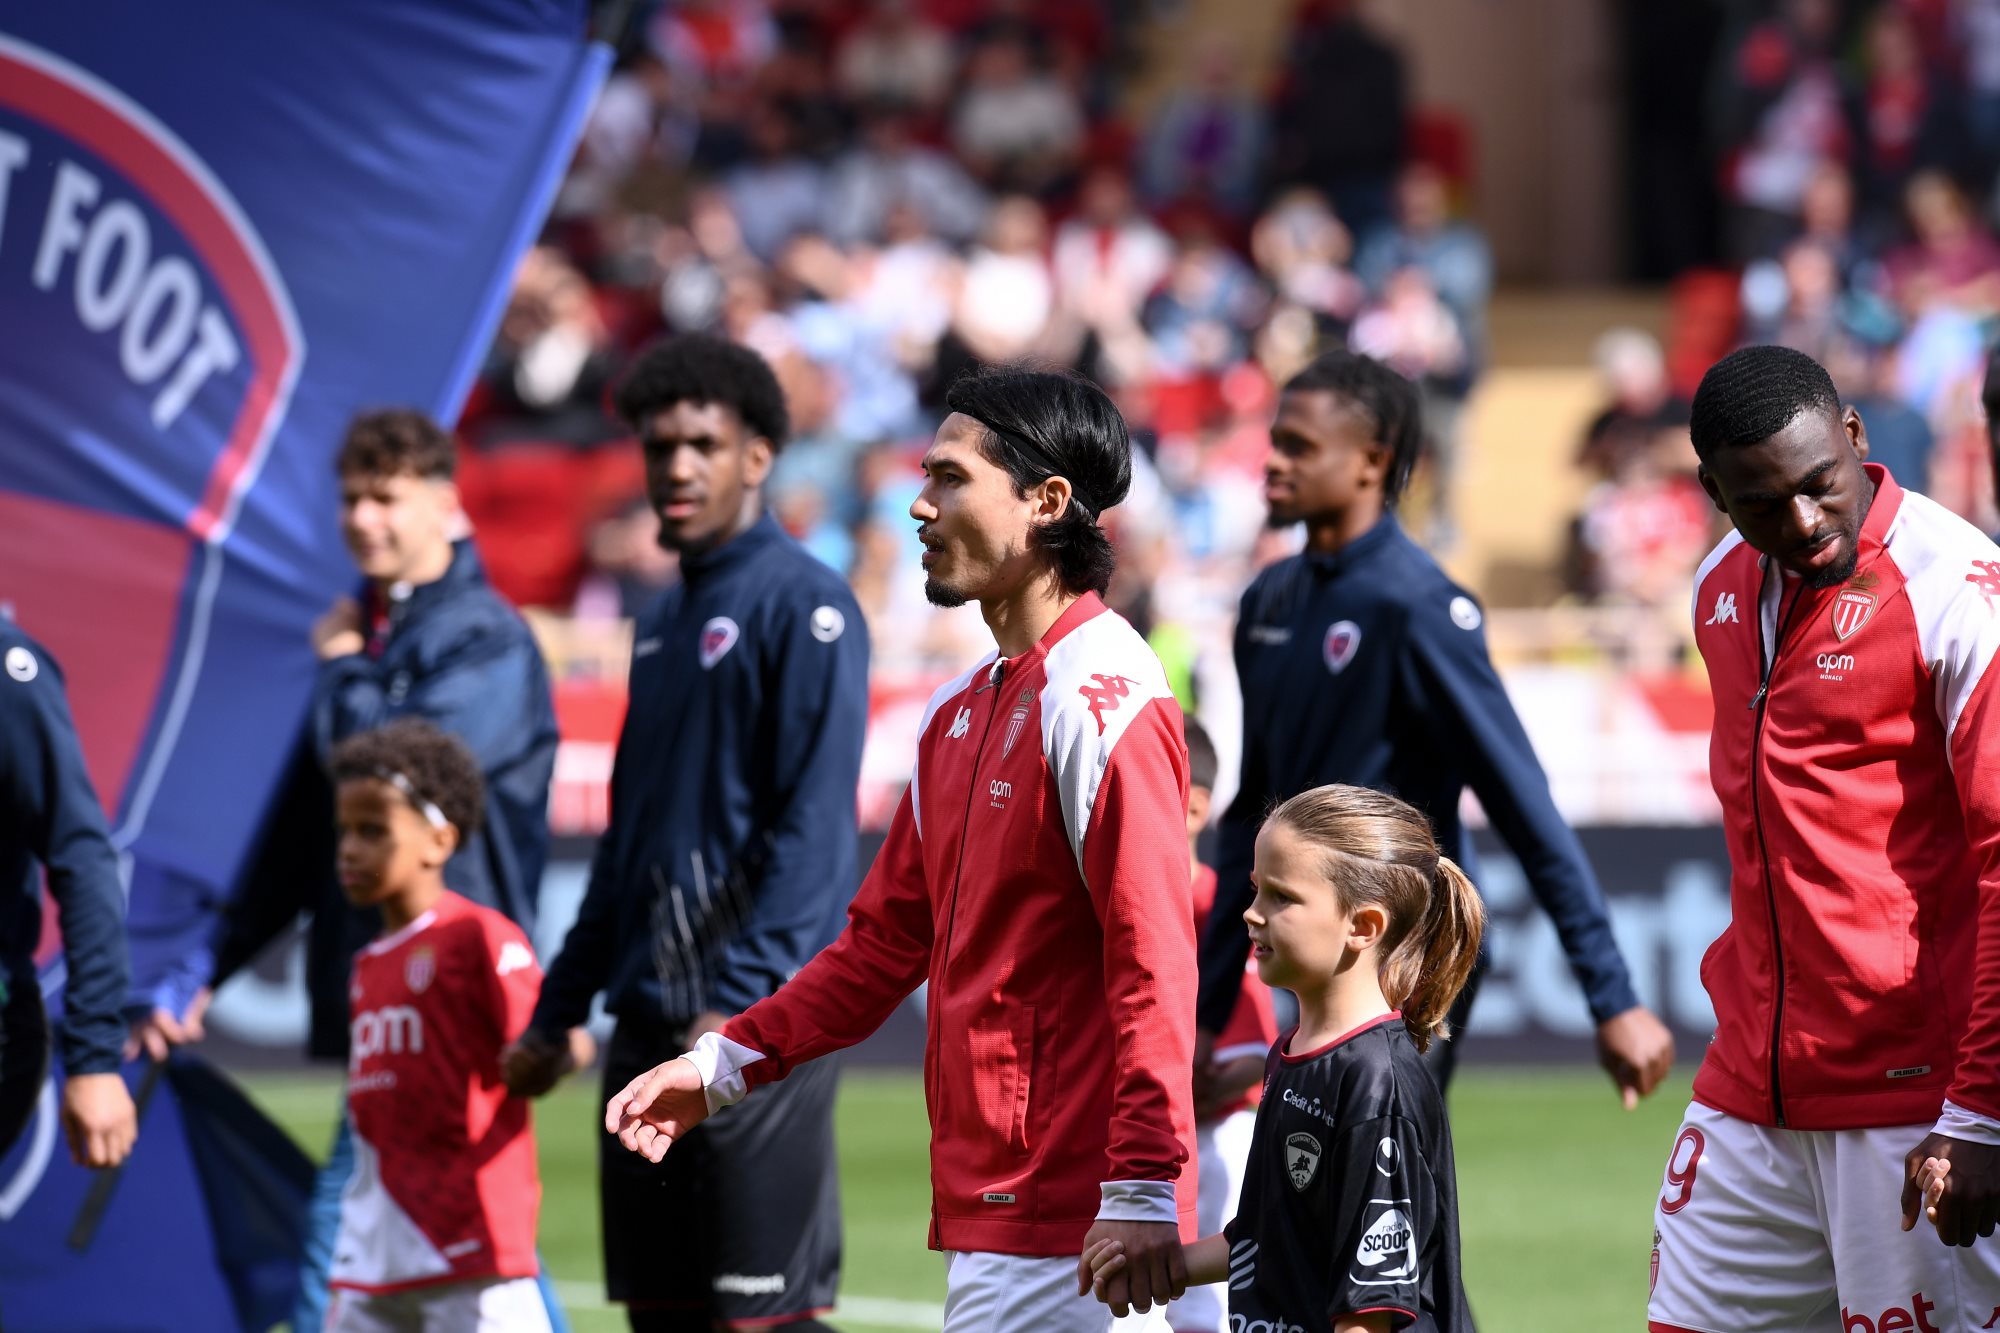 AS Monaco's Takumi Minamino on the pitch before facing Clermont Foot